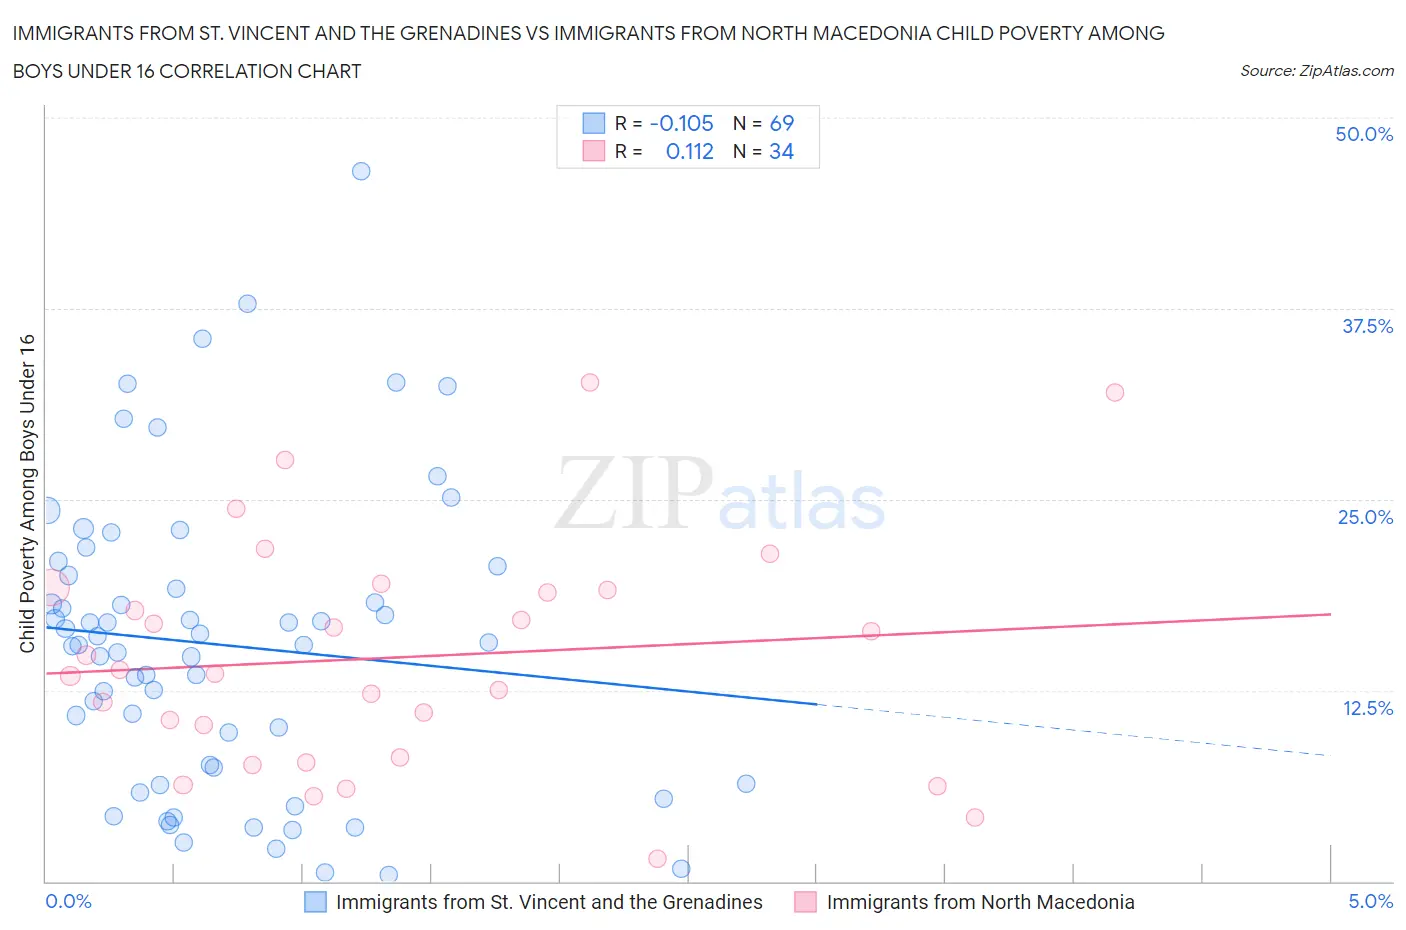 Immigrants from St. Vincent and the Grenadines vs Immigrants from North Macedonia Child Poverty Among Boys Under 16